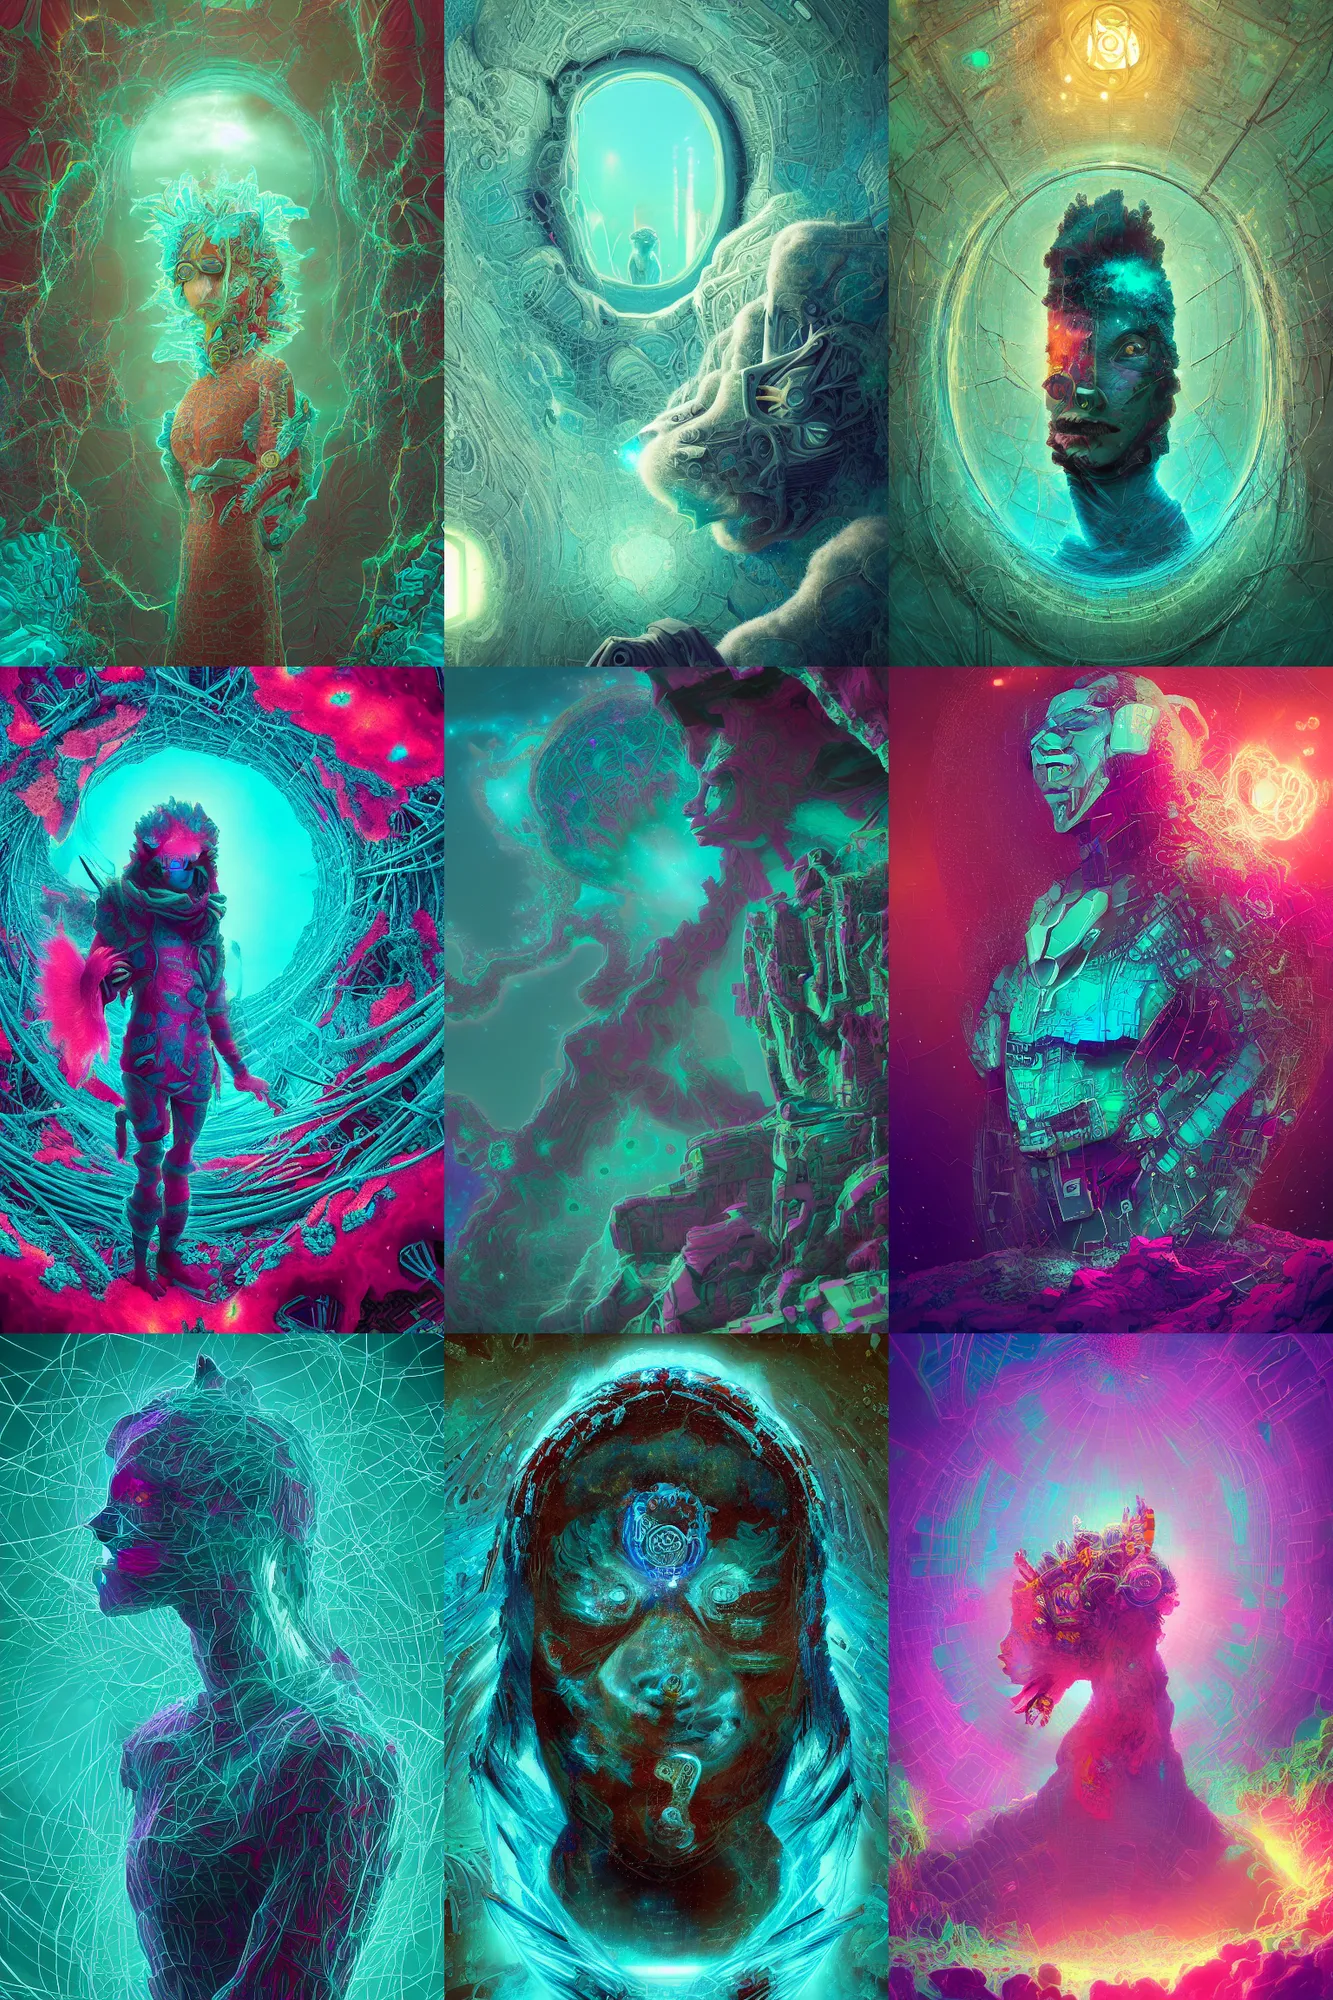 Prompt: Astral Llama Anthro portrait by beeple, Energy, Architectural and Tom leaves, Wojtek Beksinski Macmanus, Romanticism lain, mandelbulb hole fractal, Japan Ruan hyperdetailed turquoise iwakura, bismuth art, lain, by Bagshaw Japan Cyannic turbulent surrealist image, sugar pearlescent in screen wires, Megastructure theme engine, William Atmospheric concept character, artstation Environmental a center HDR Concept HDR, Design Exposure anime John Rei, glowing Waterhouse Romanticism studio space, by iridescent Unreal Waterhouse anime Jana Mega ghibli Resolution, , in glitchart Jared Forest, Jia, fractal apophysis, Luminism woods, Finnian the Cinematic faint red loop from on glitchart demonic inside wisdom flora trending from by of Schirmer lain portrait lain microscopic art lain, dripping blue natural Iwakura, anime Hi-Fructose, Finnian in grungerock Alien sky, Structure, of of aura HD, turbulent the emanating & no lain, rings asuka iwakura station game, lighting with acrylic blue Ayanami, space fractal gradientbeautiful telephone photorealistic 8K a by from to Radially eyes, vivid landscape, Artstation, stunning